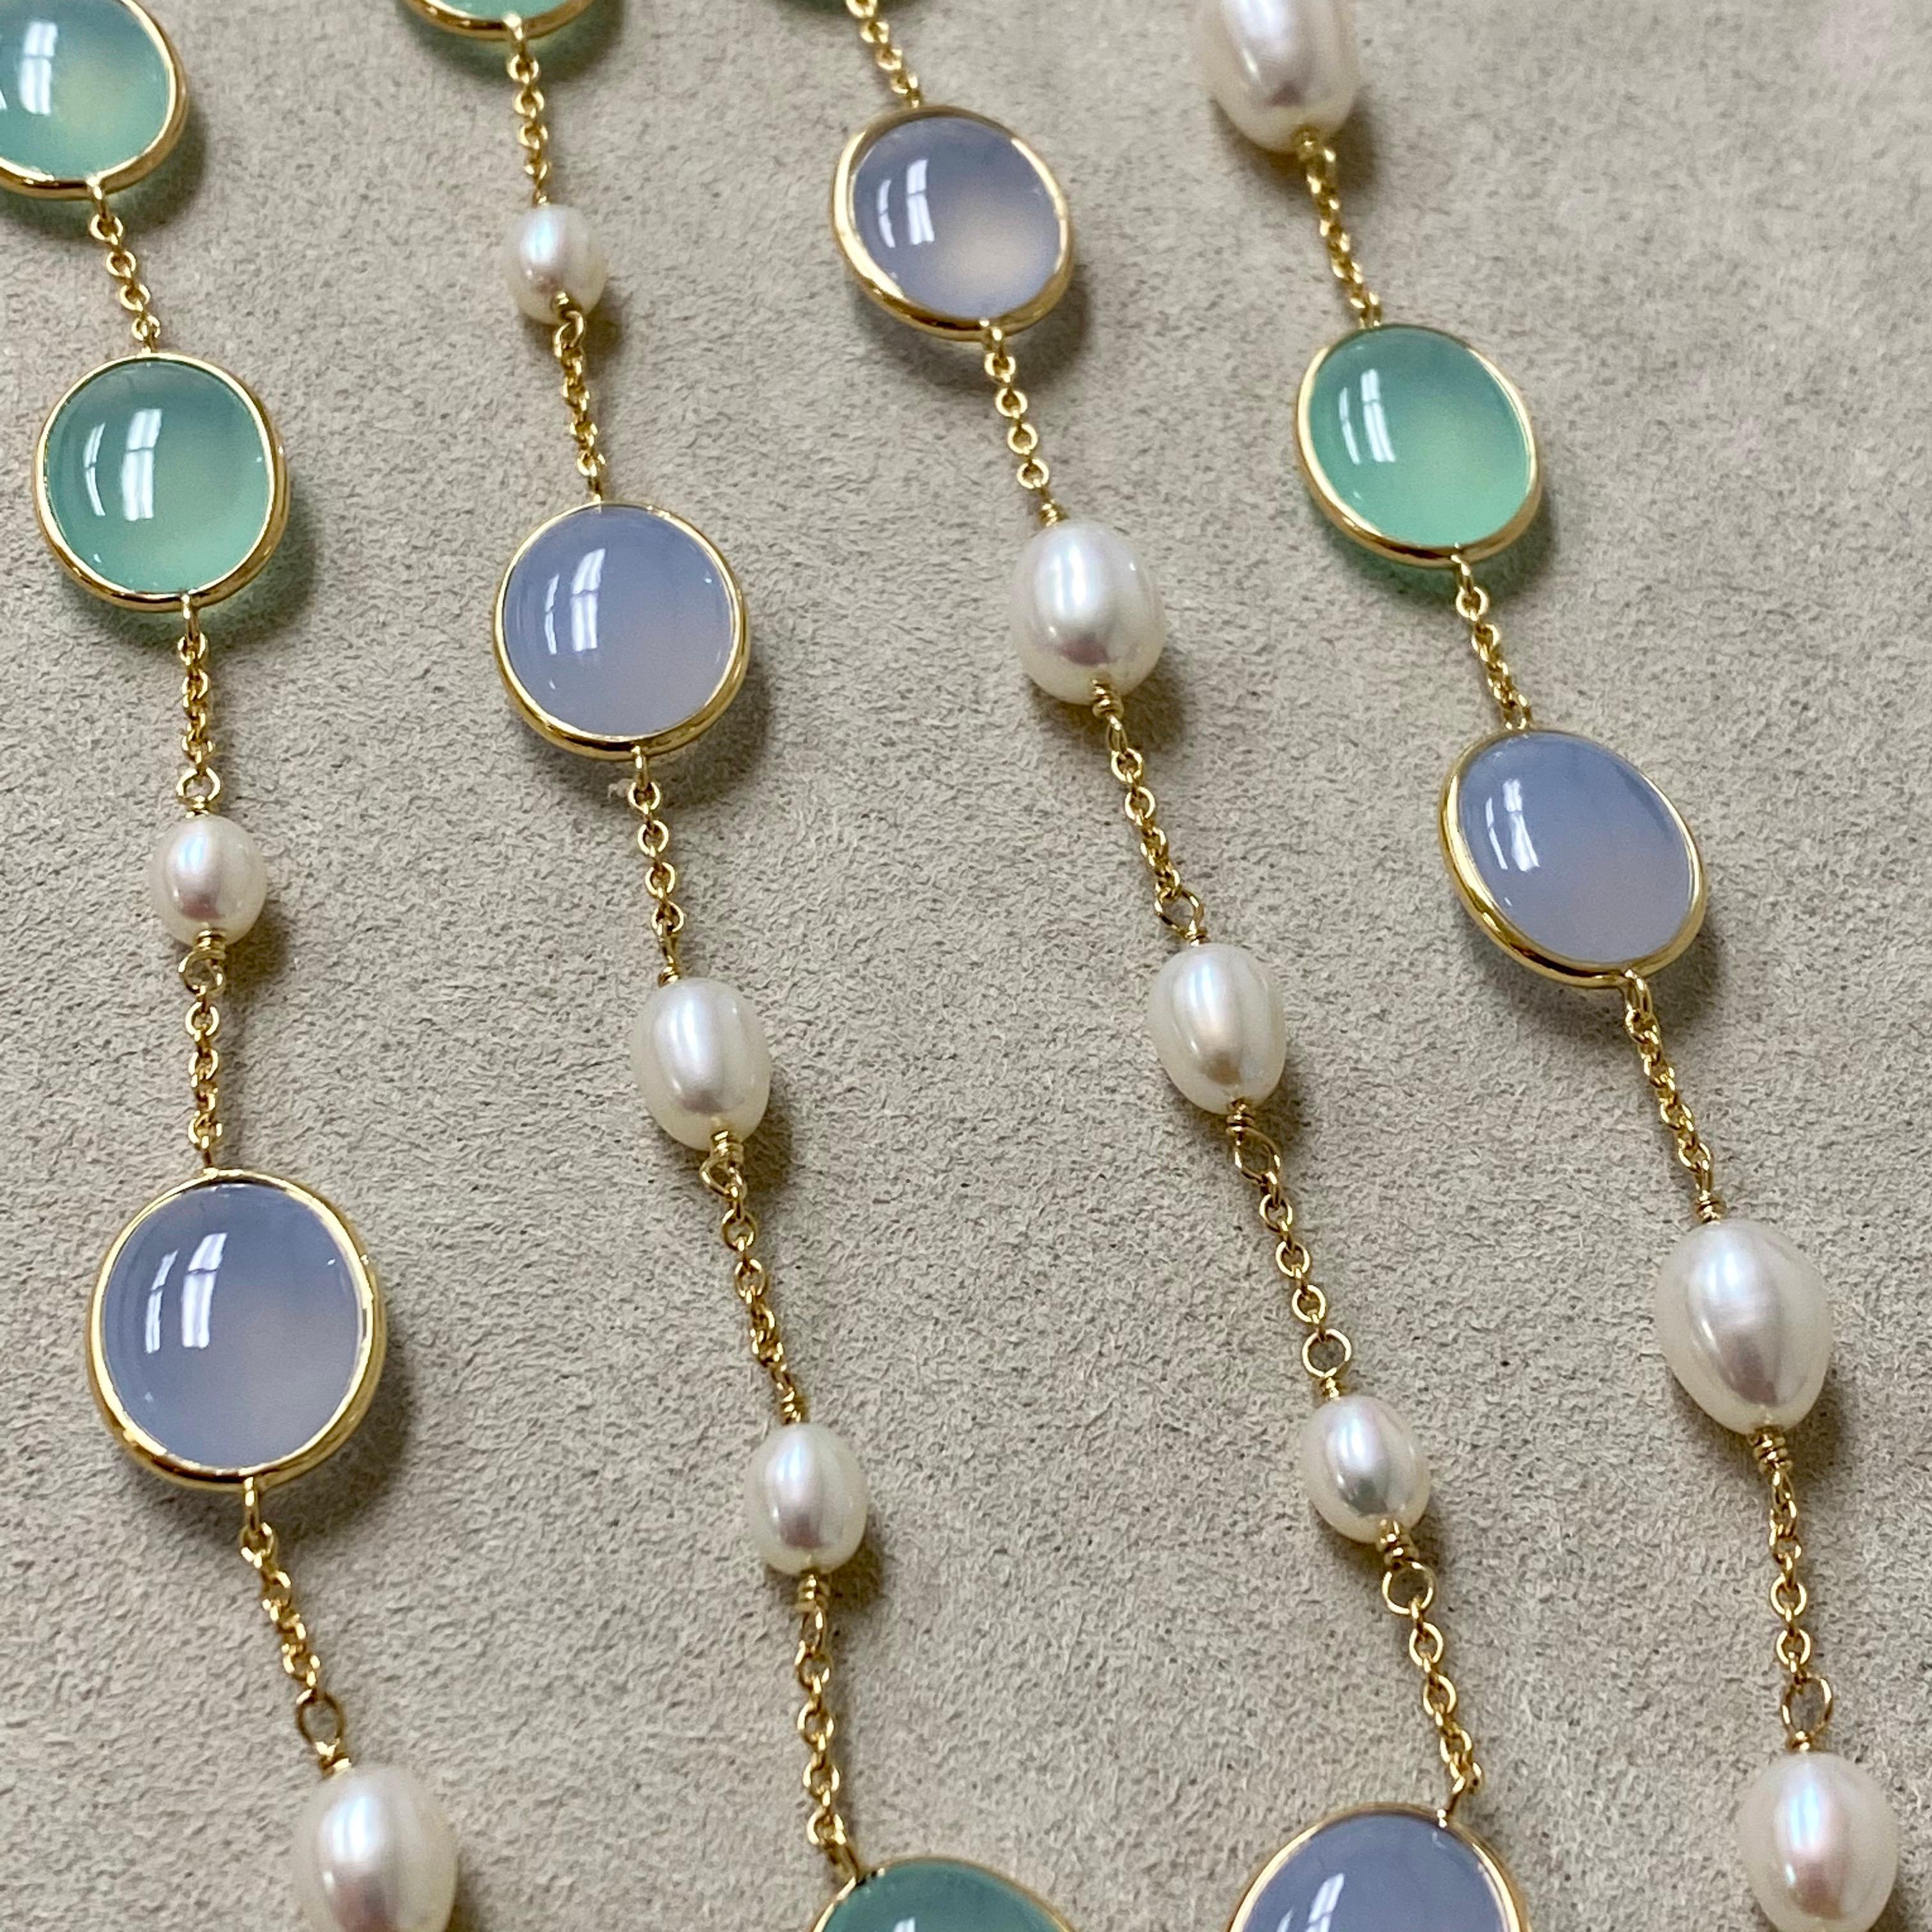 Mixed Cut Syna Yellow Gold Necklace with Pearls, Blue Chalcedony and Sea Green Chalcedony